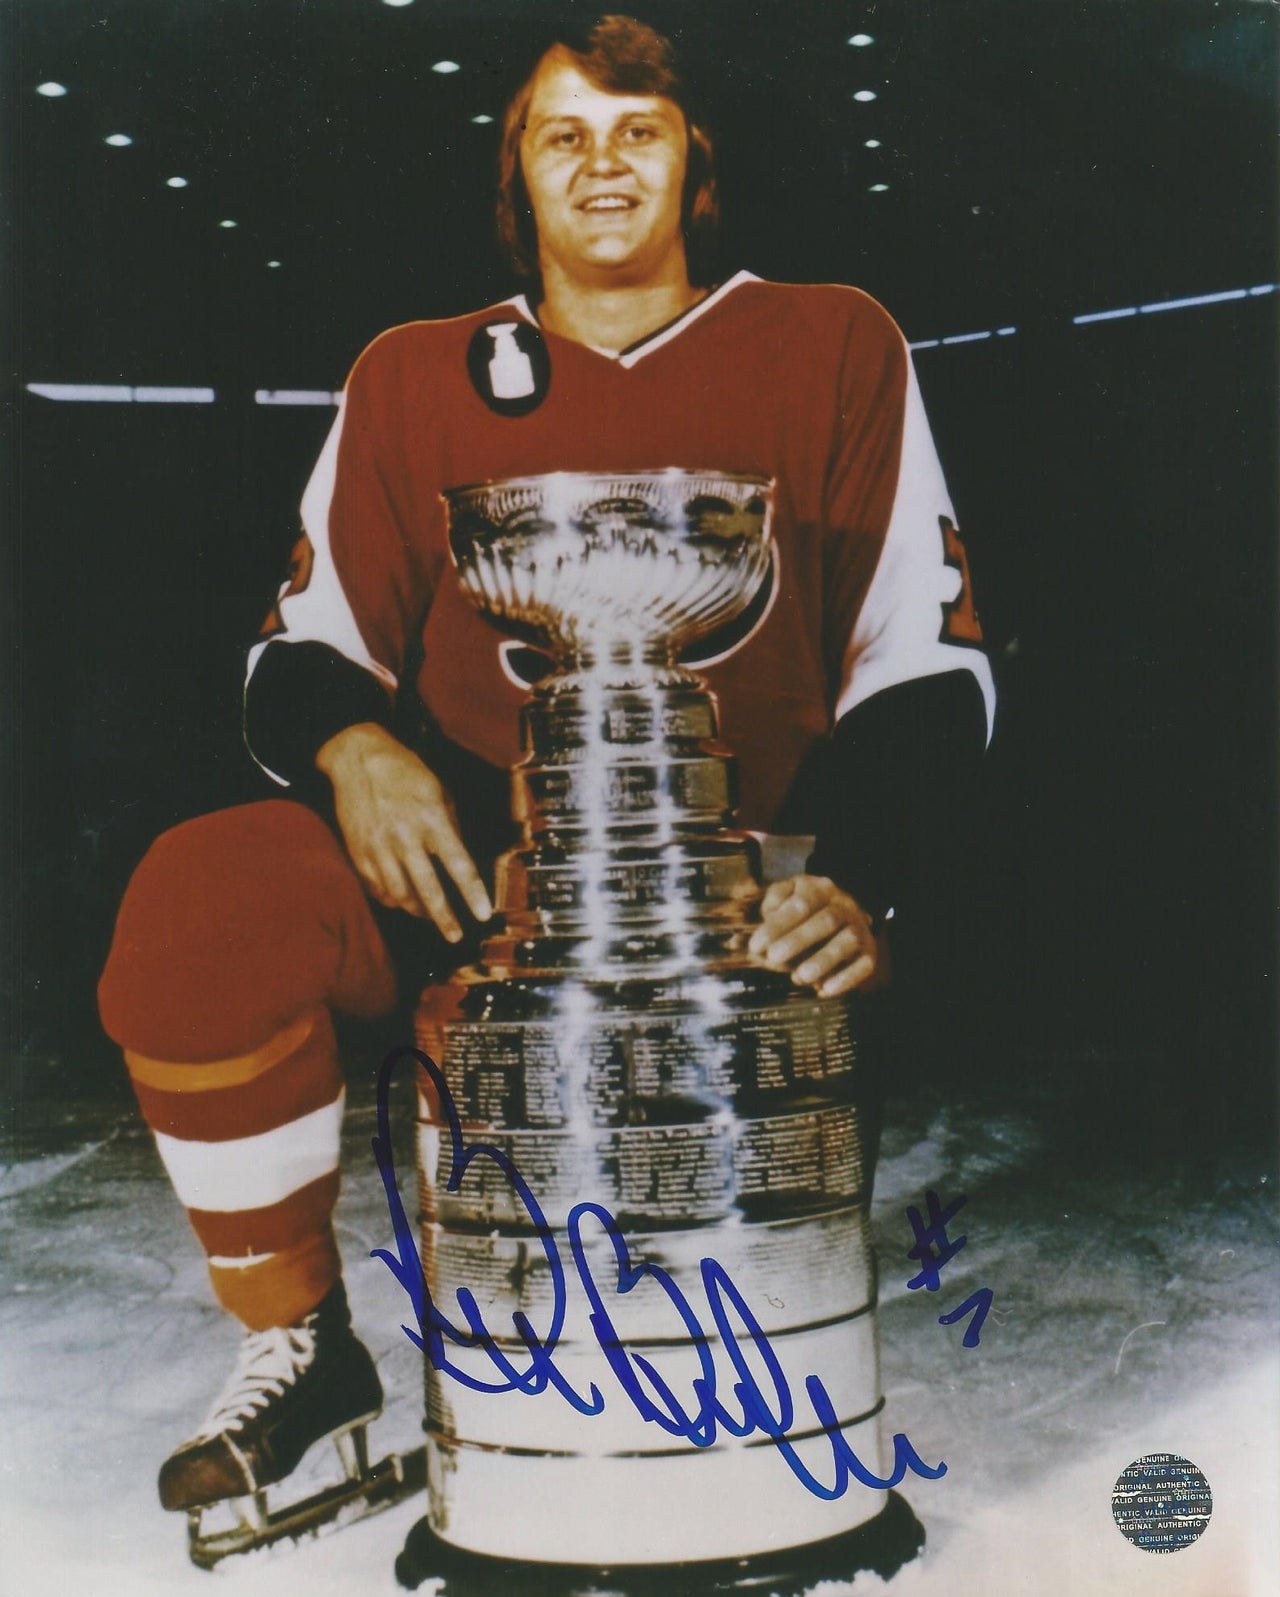 Bill Barber Stanley Cup Autographed Philadelphia Flyers 8" x 10" Hockey Photo - Dynasty Sports & Framing 